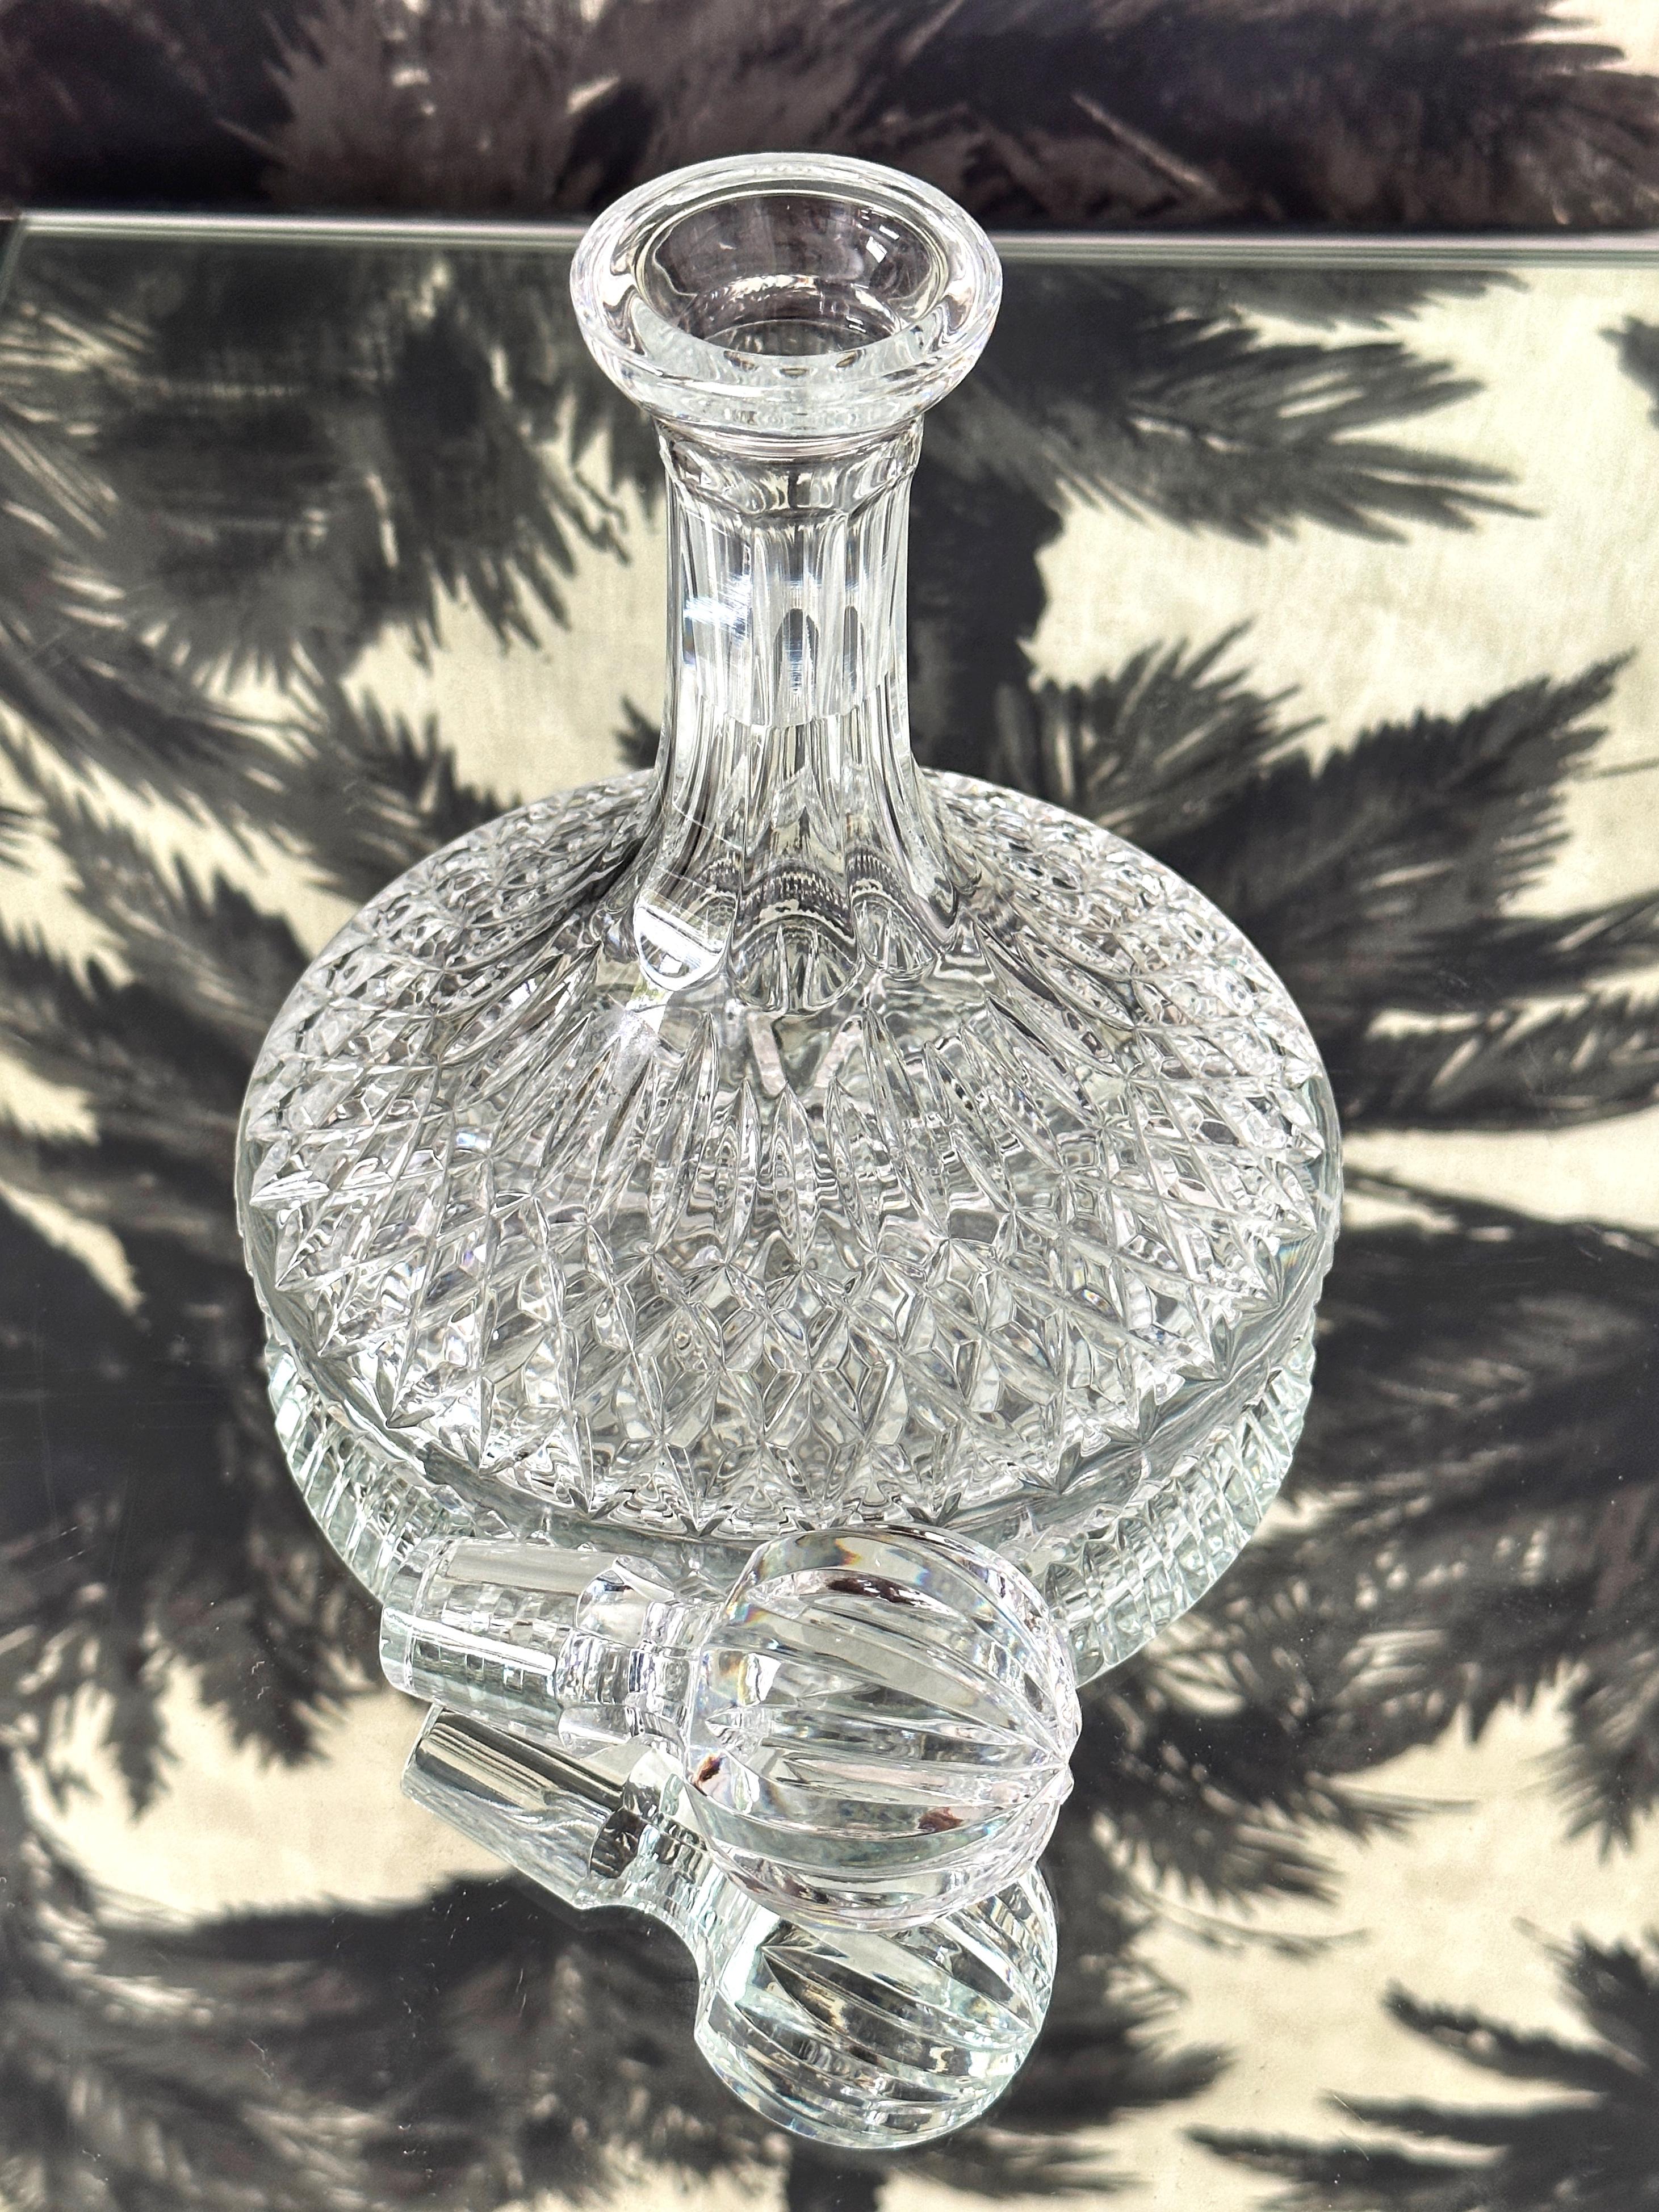 Irish Vintage Waterford Crystal Ships Decanters with Etched Diamond Cuts, c. 1970's